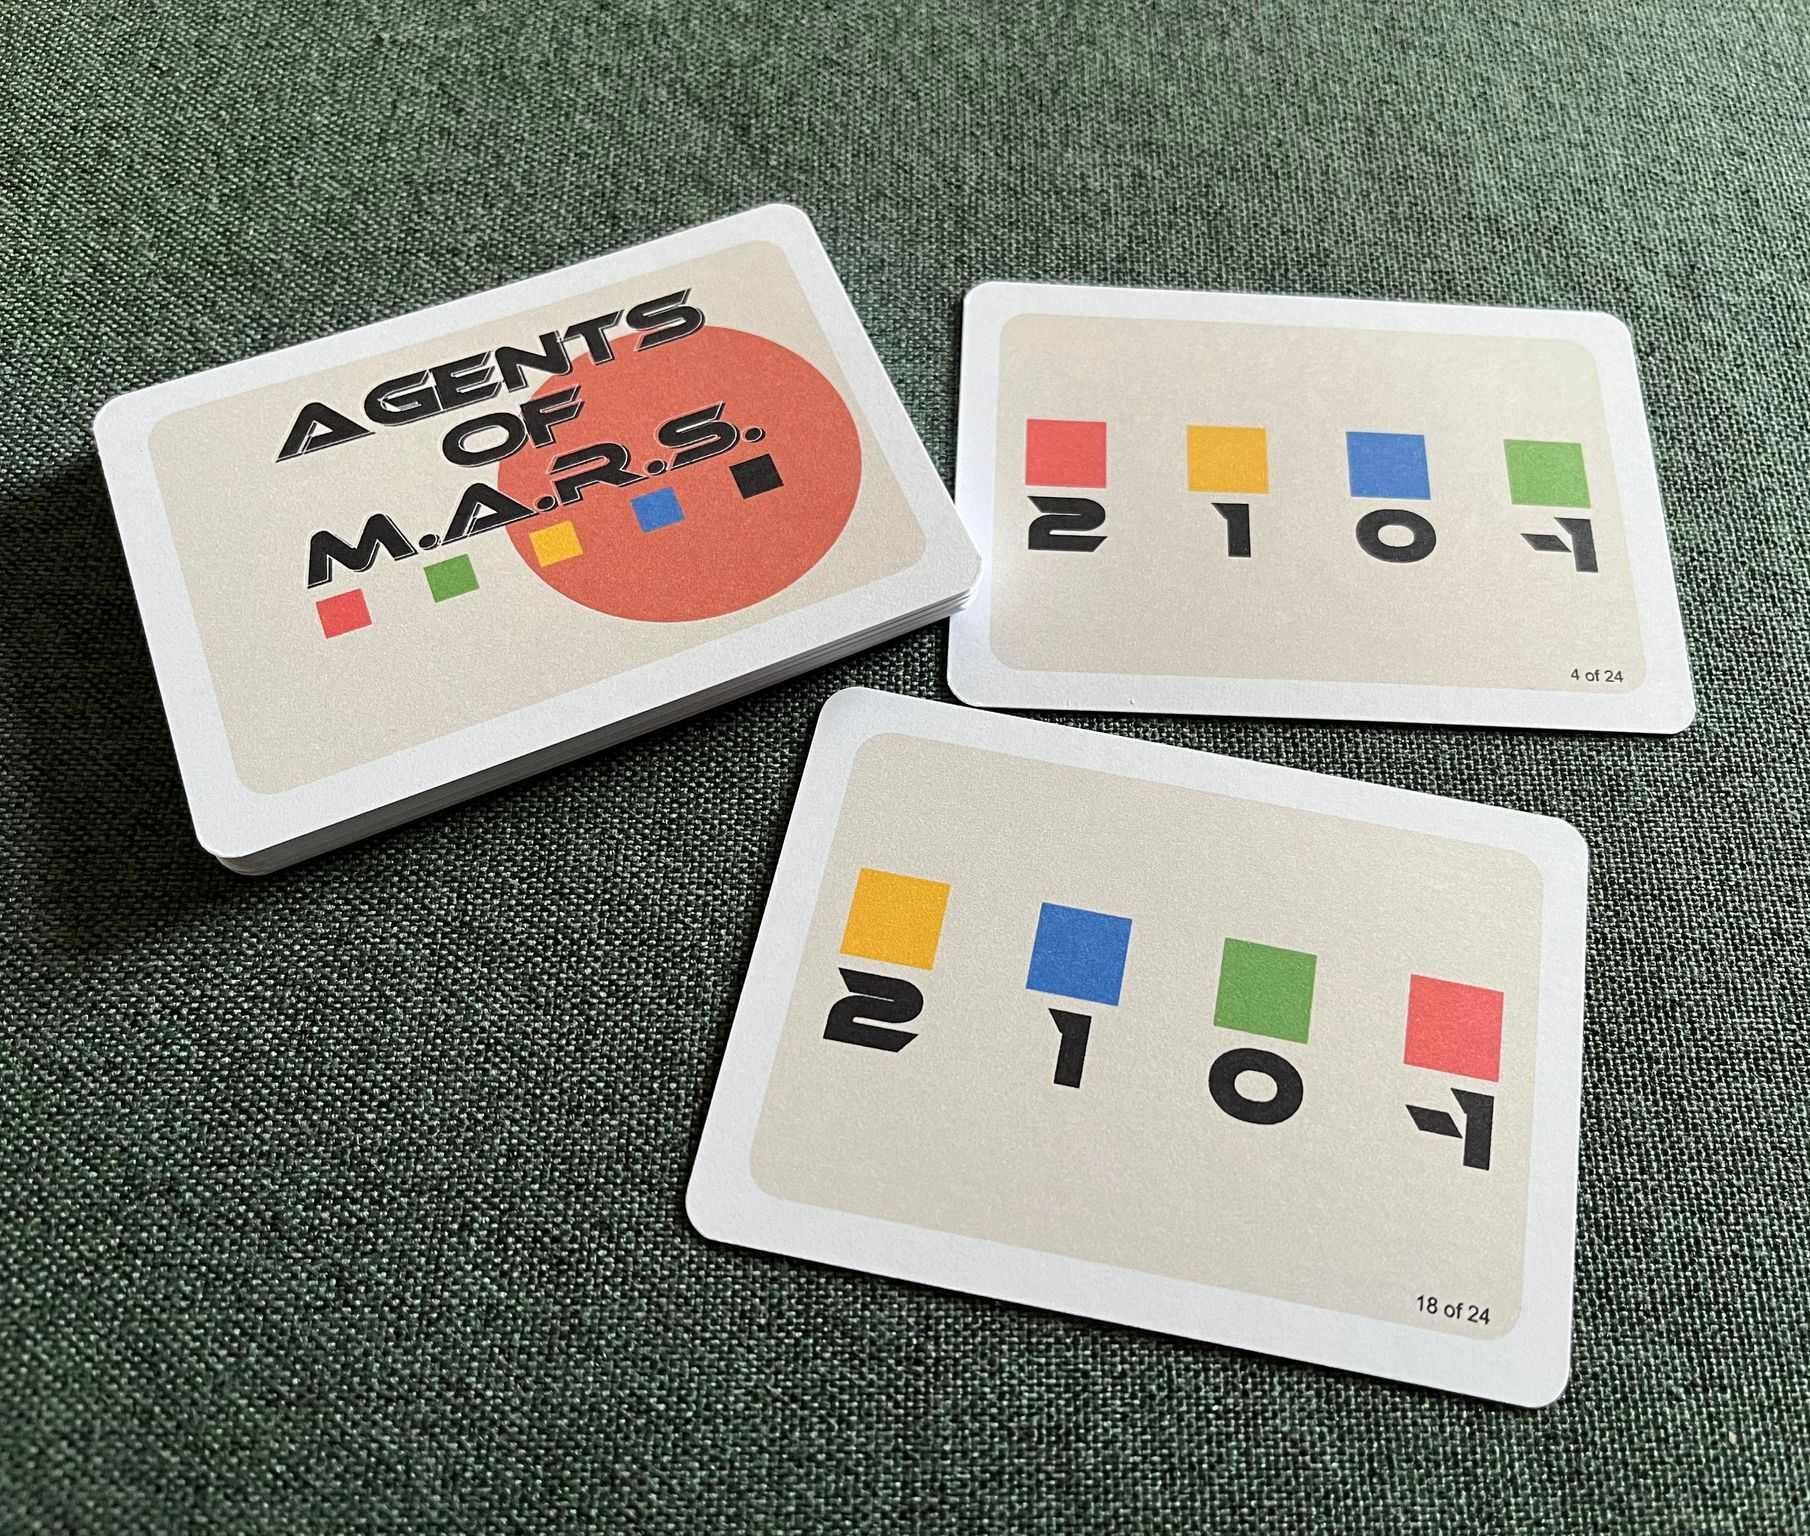 Agents of M.A.R.S.: Objective Initiative Out Now!